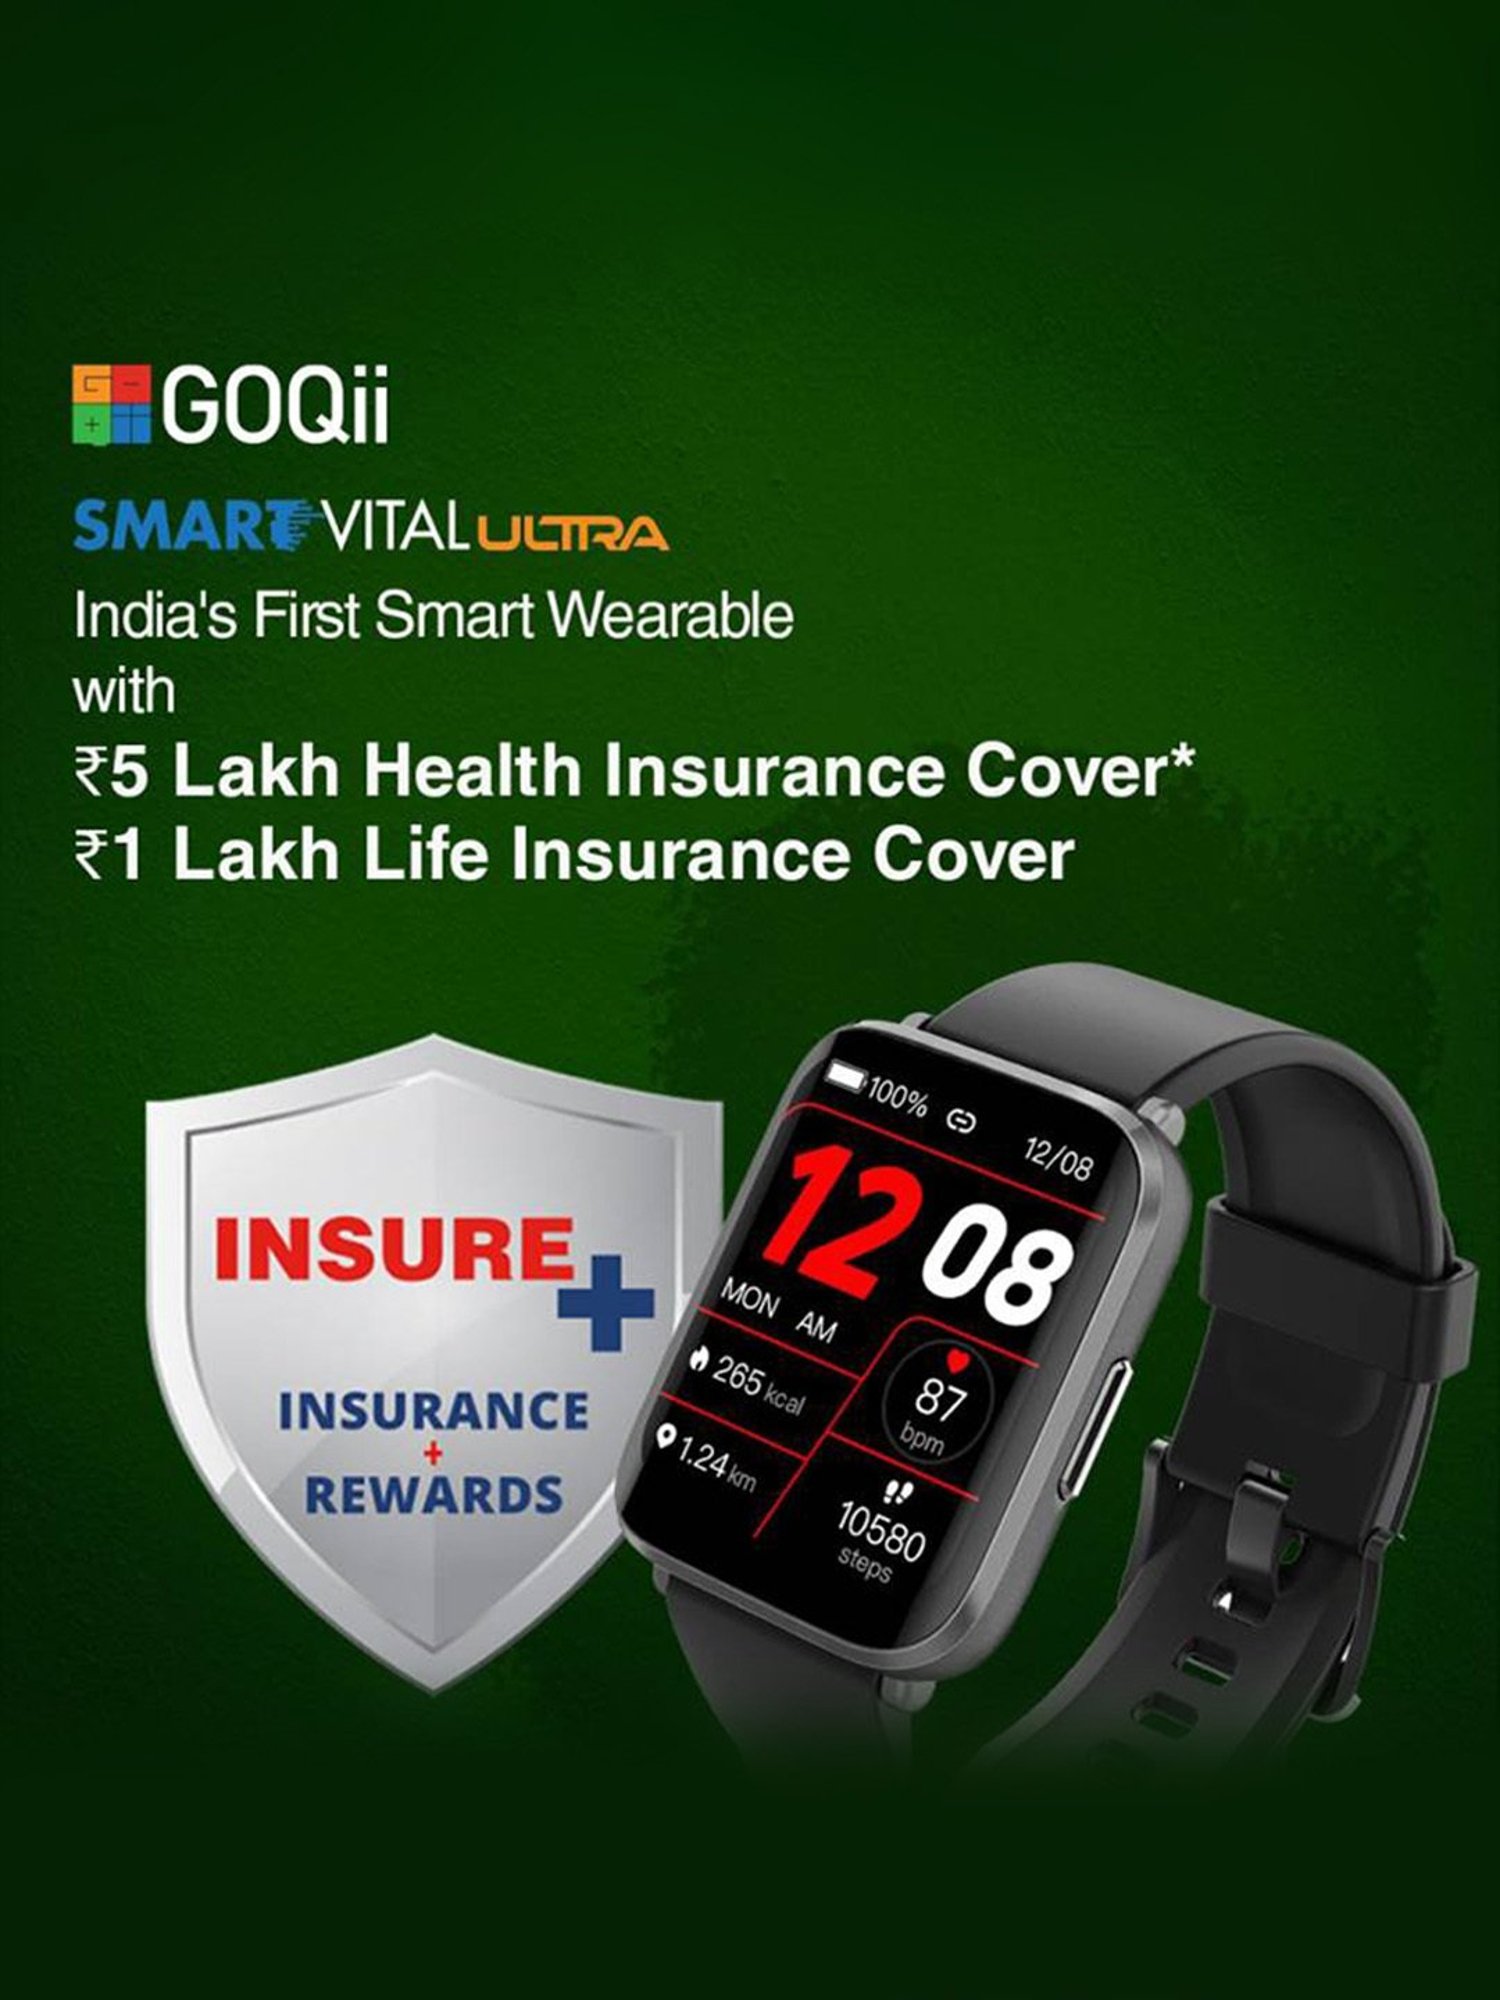 GOQii Launches GOQii Smart Vital 2.0, an ECG-Enabled Smart Watch with  Integrated Outcome based Health Insurance & Life Insurance - Technuter